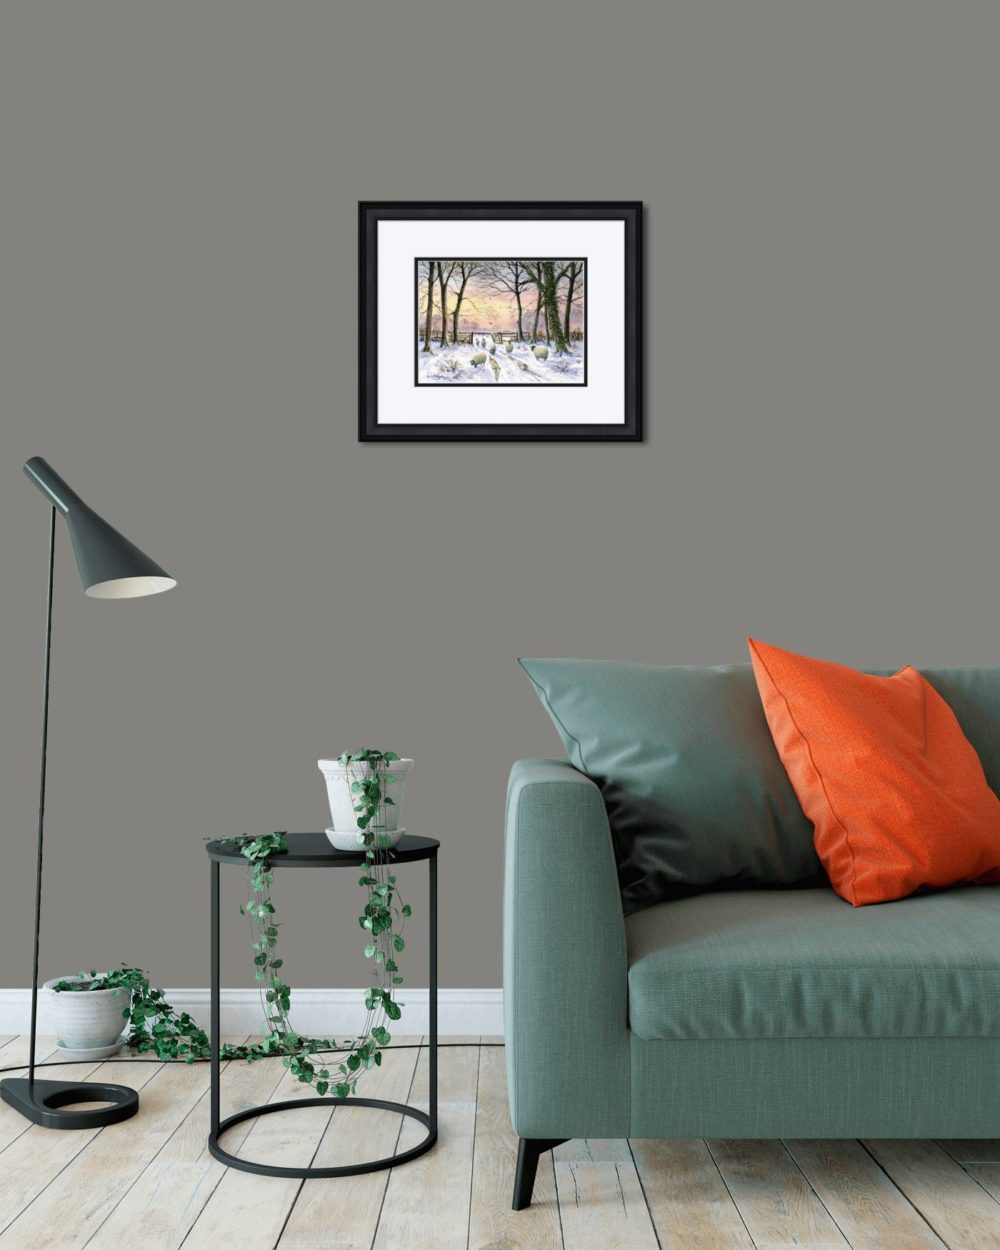 Woodland Snow Print (Small) in Black Frame in Room